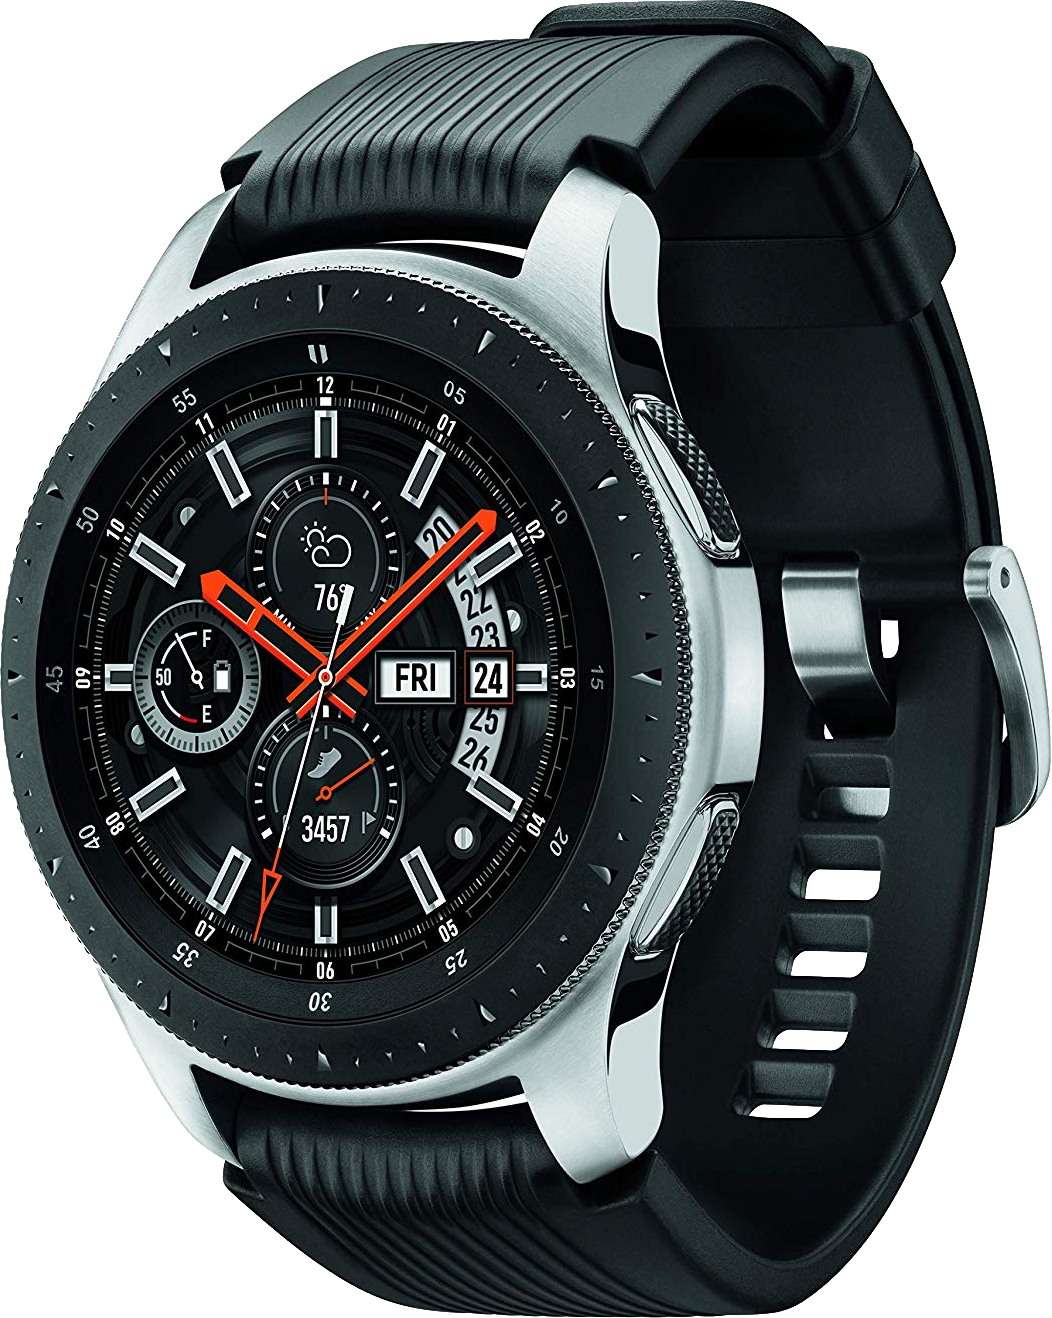 Samsung Galaxy Watch - Full phone specifications - GSM Arena.